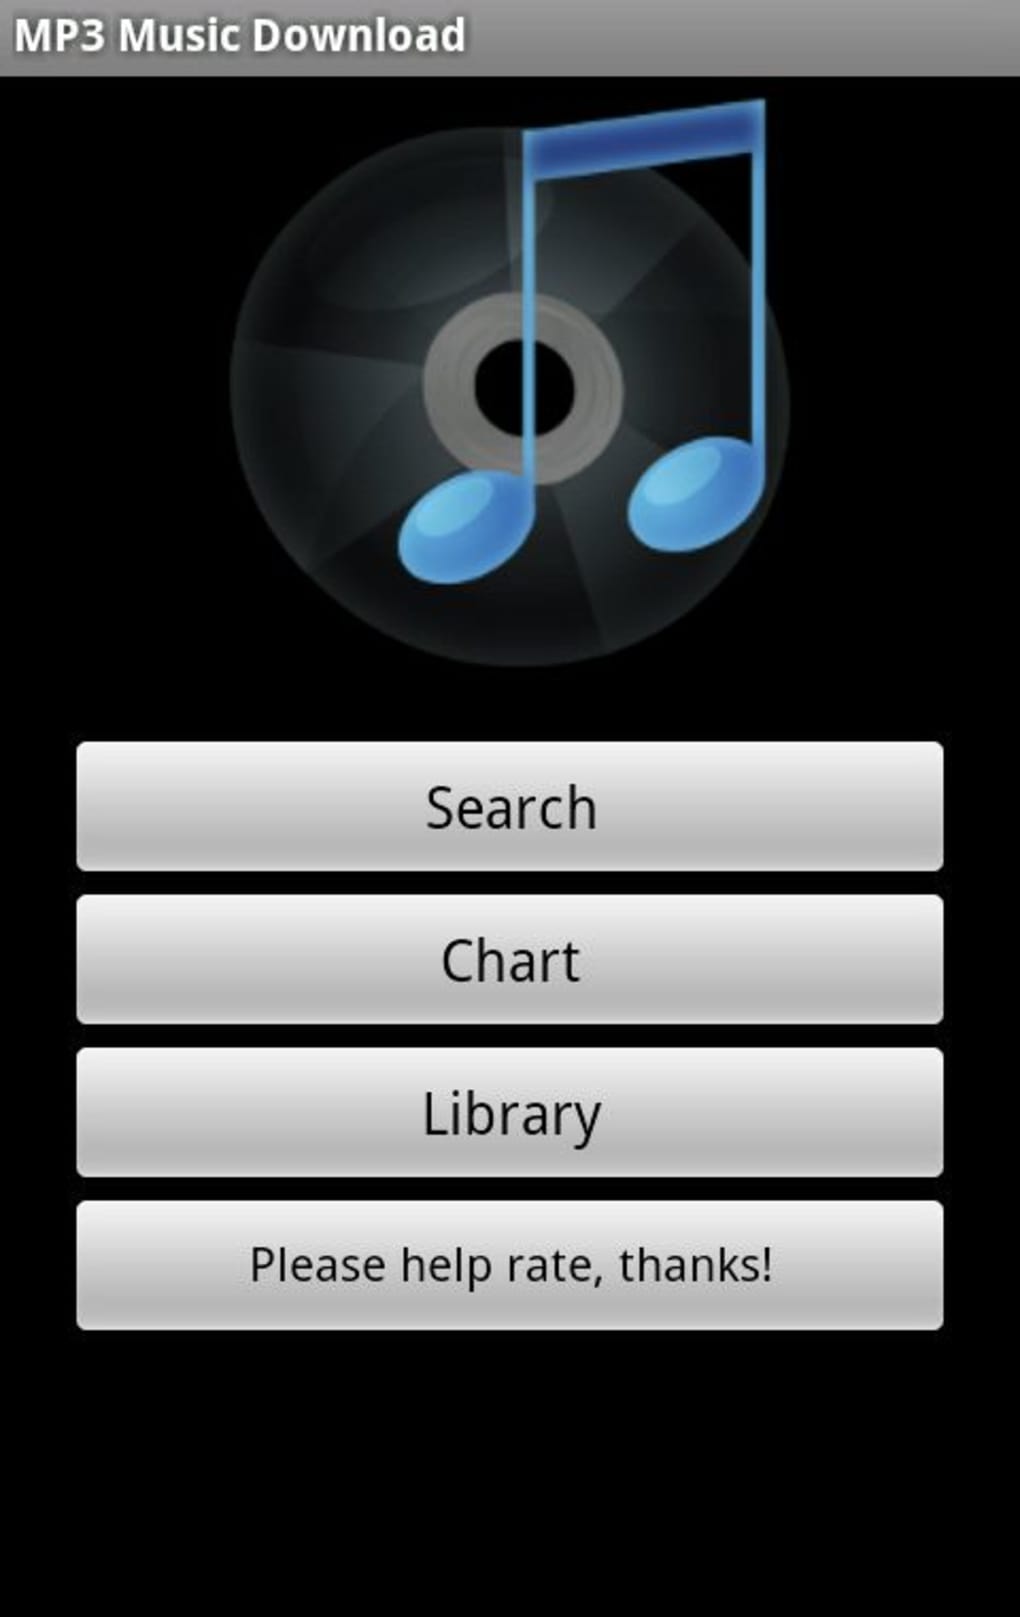 mp3 download with image